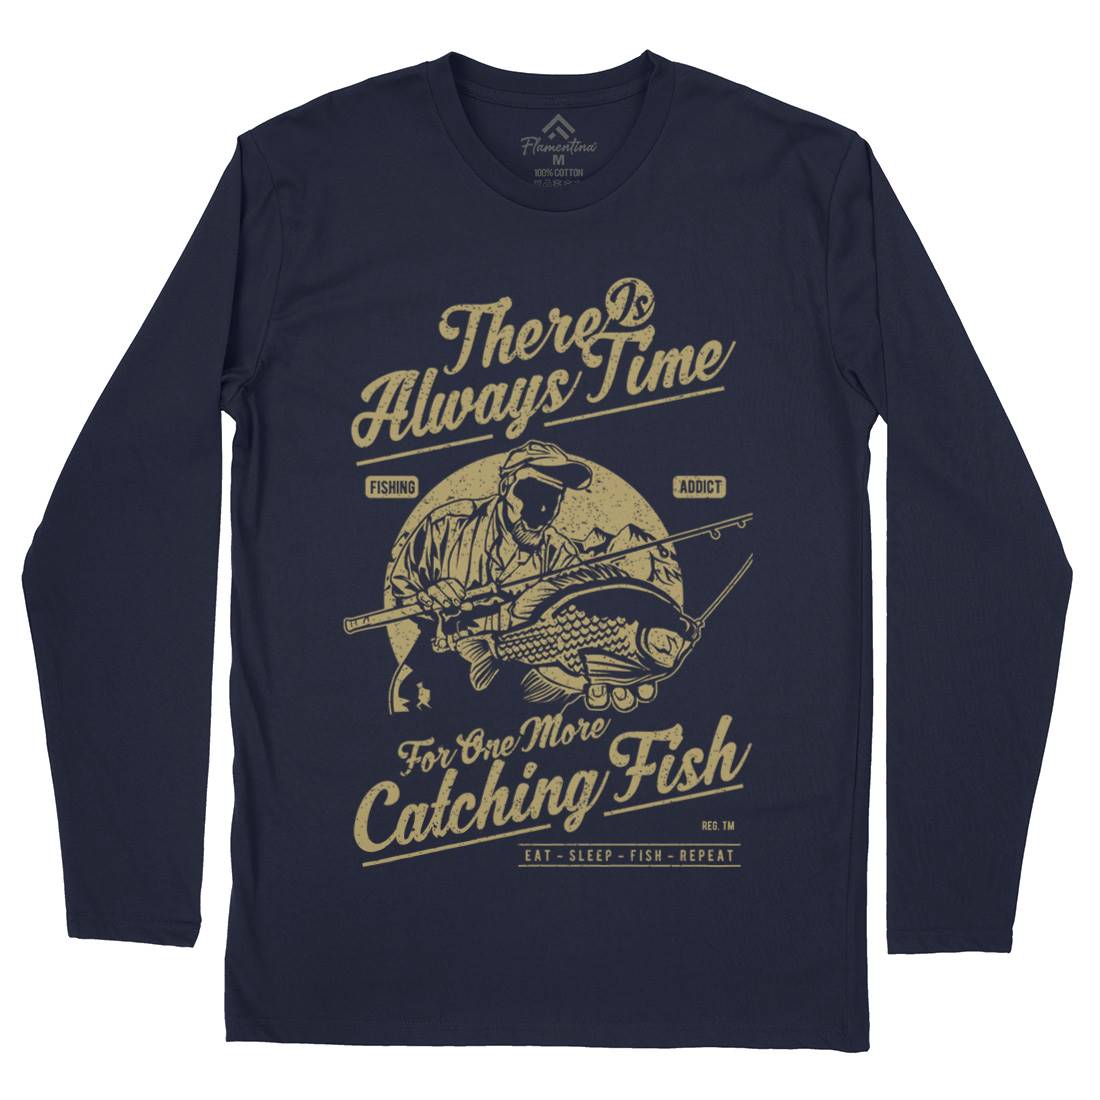 One More Catching Mens Long Sleeve T-Shirt Fishing A731